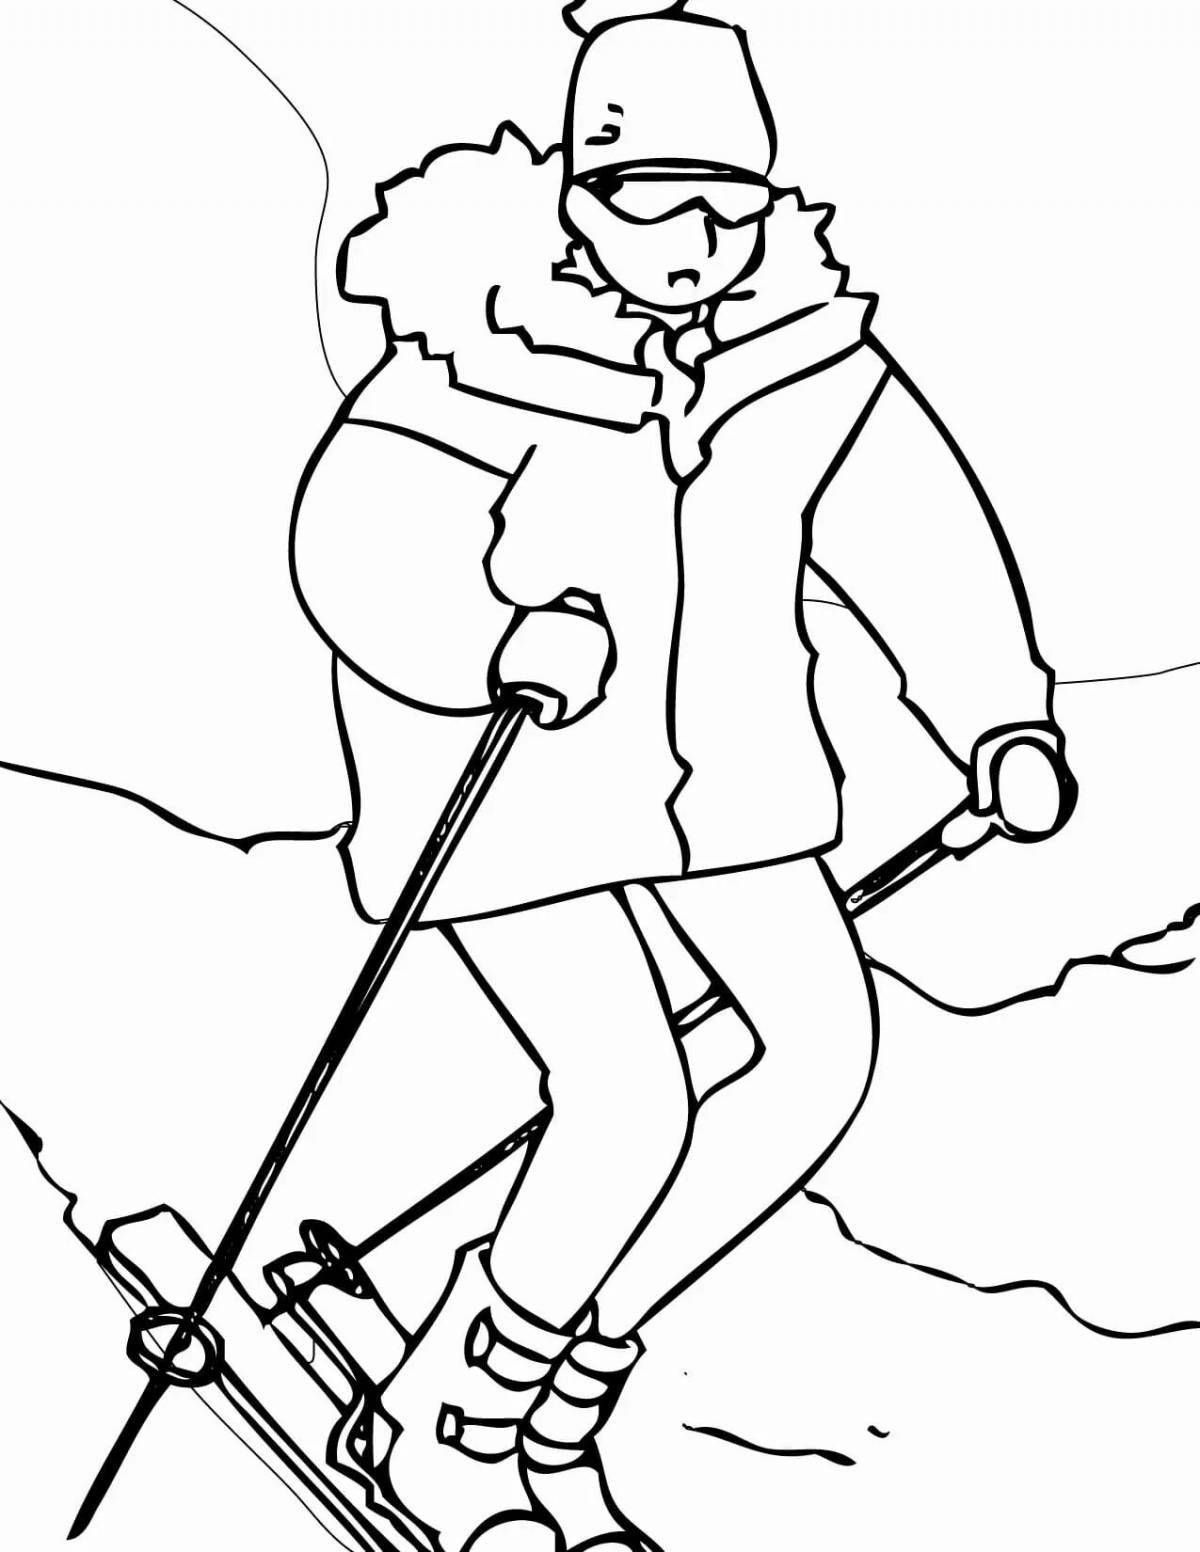 Exciting family skiing coloring book